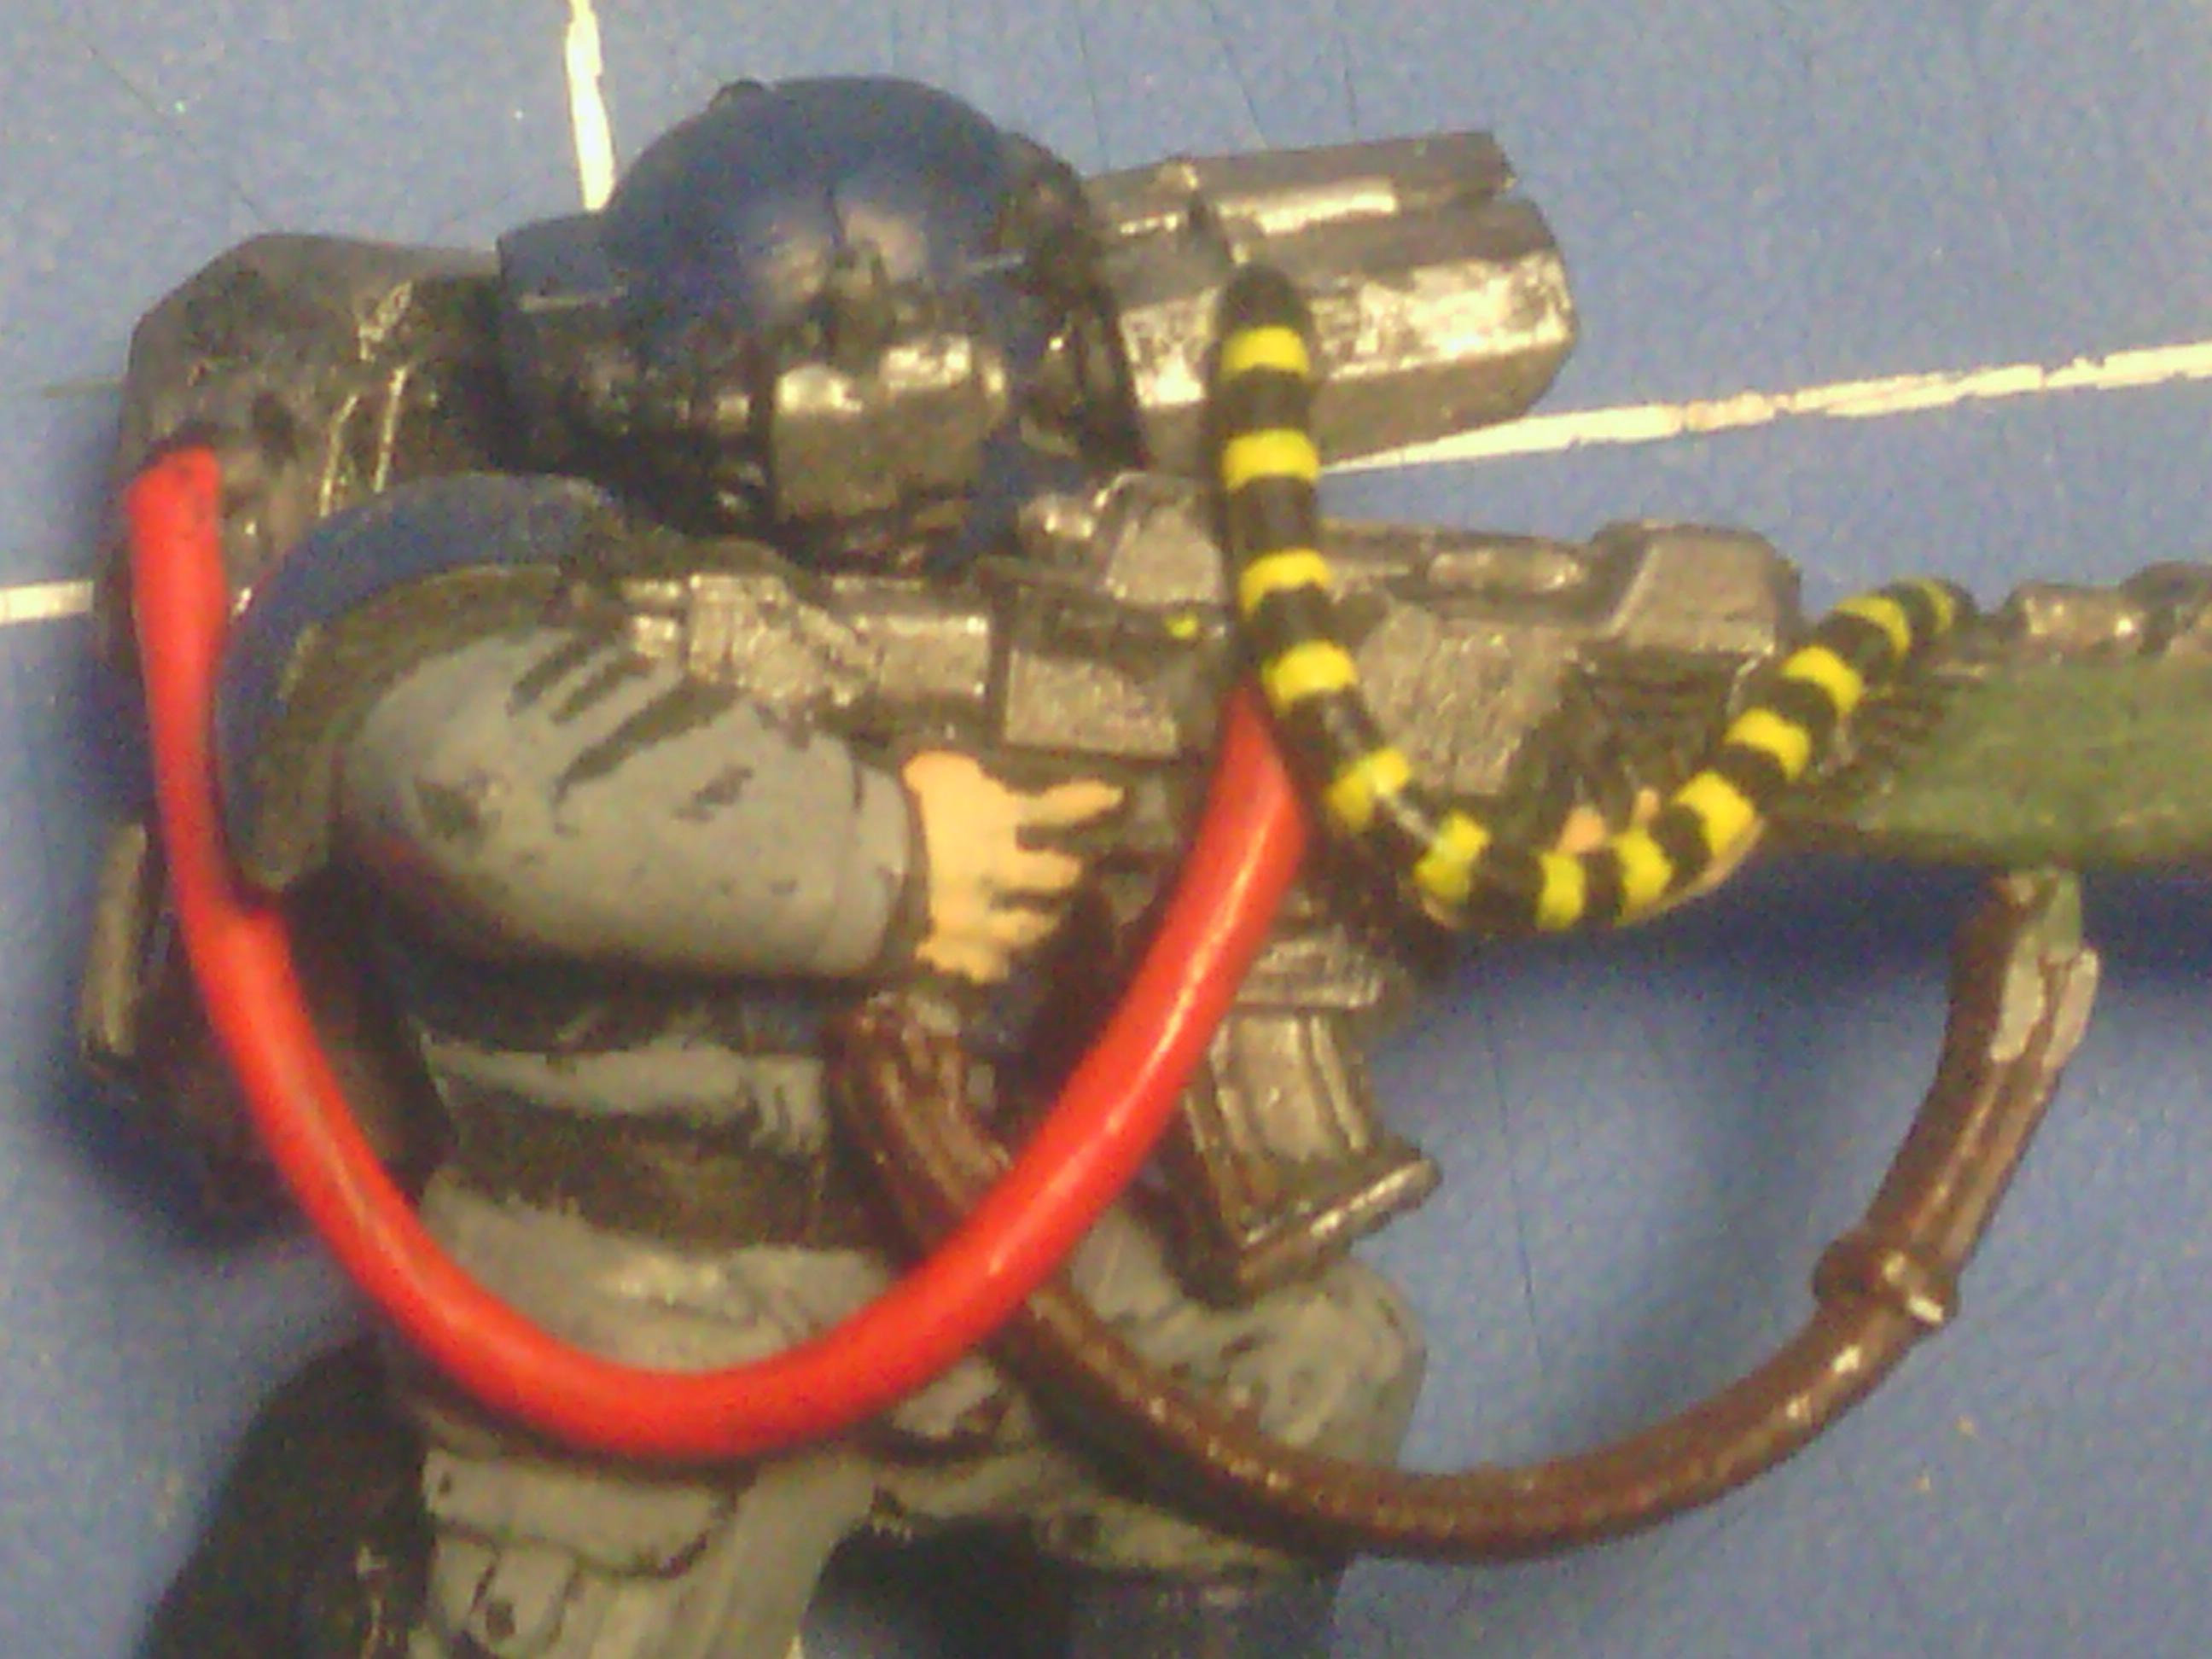 Side view. Cables and binoculars. Strap is from a Kroot gun